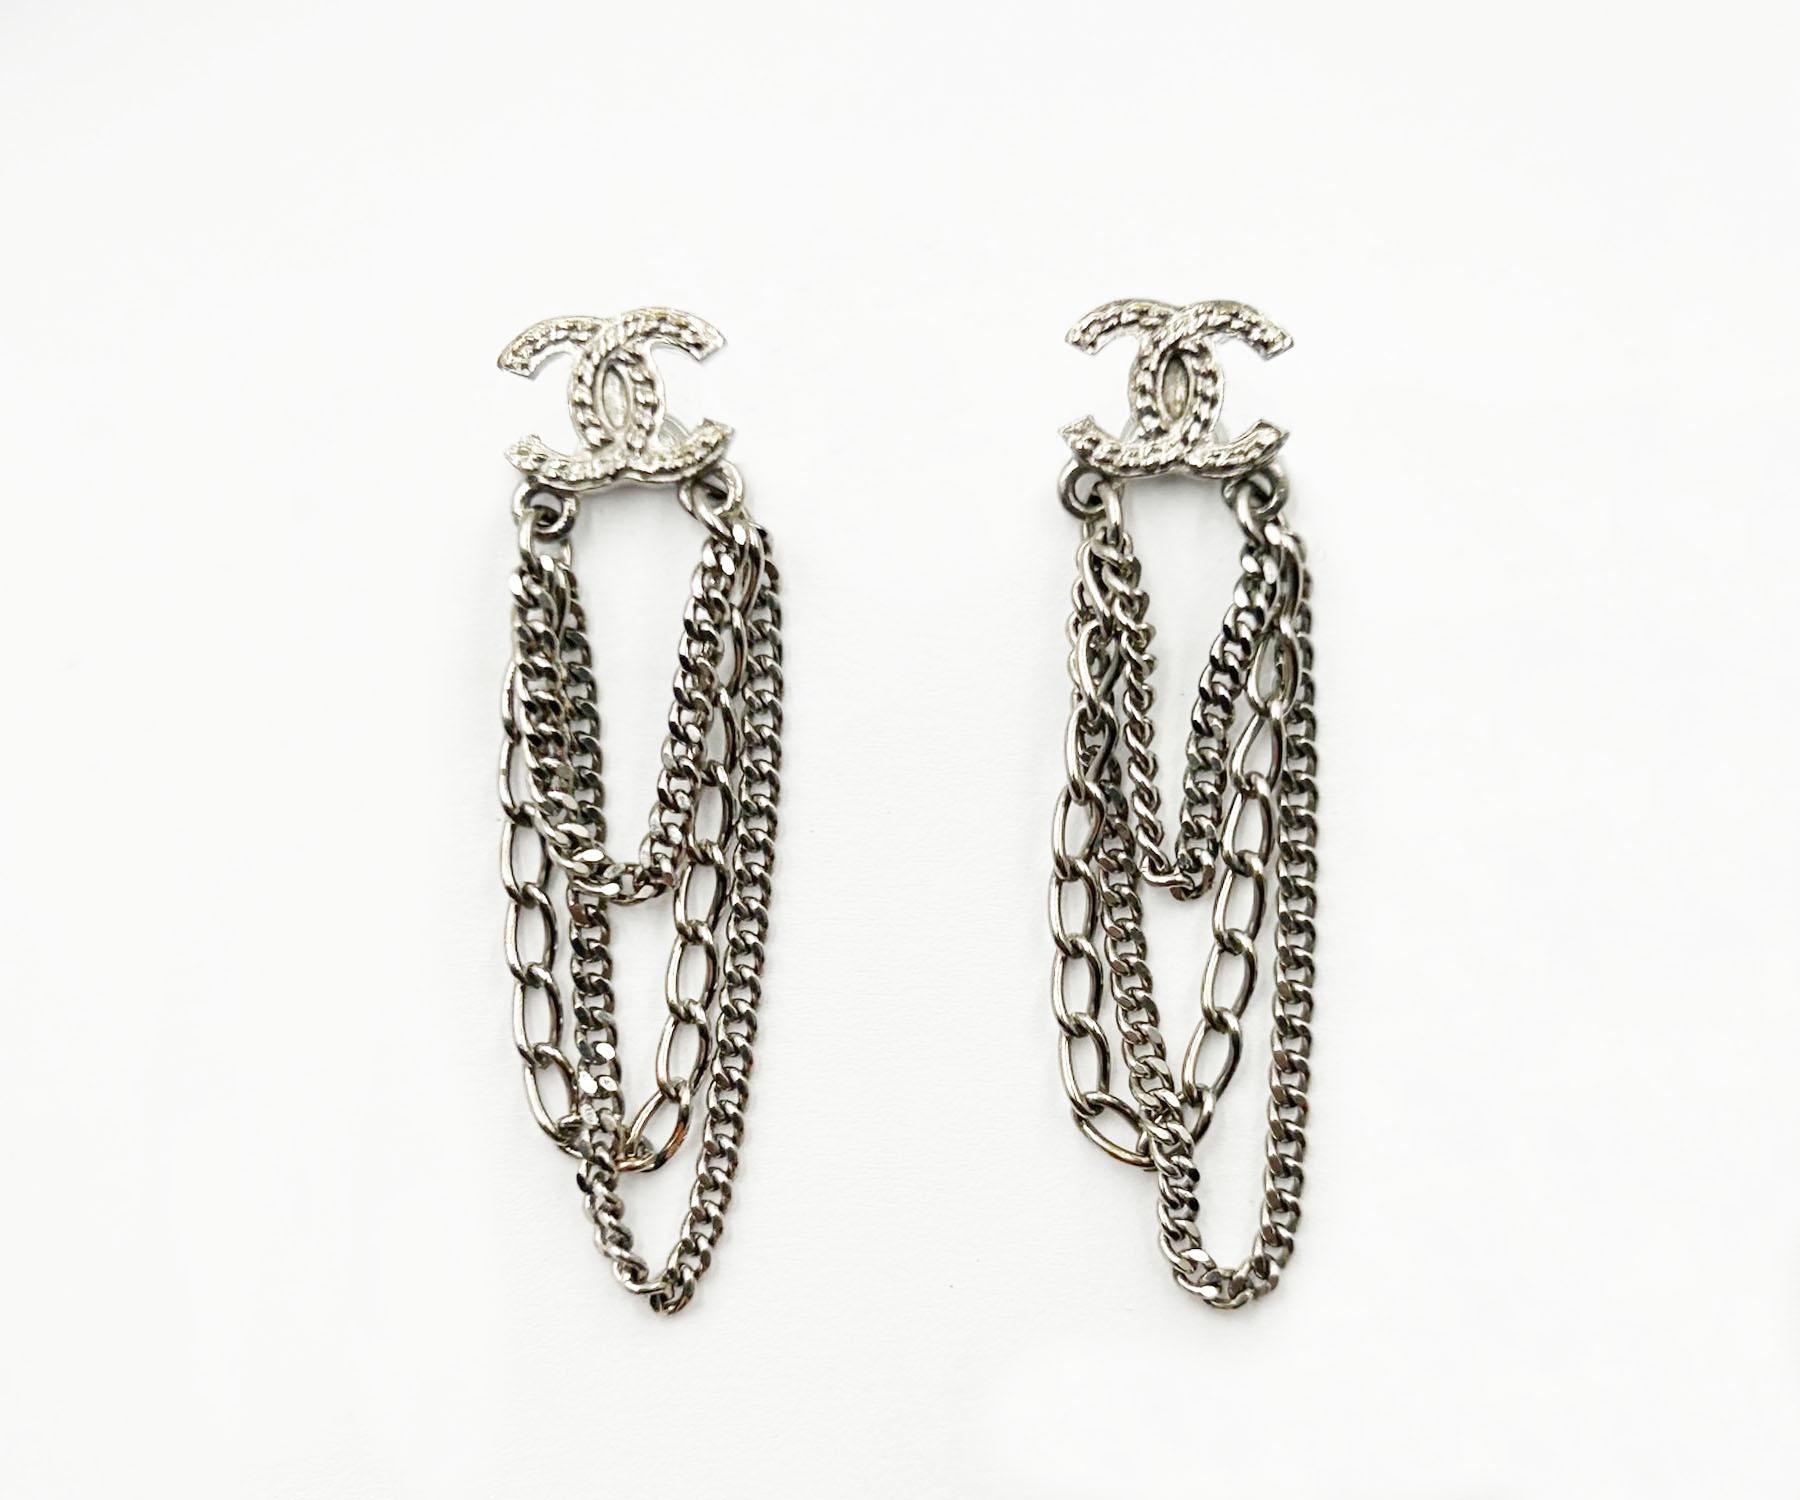 Chanel Silver CC Multi Chain Dangle Long Piercing Earrings

*Marked 09
*Made in France
*Comes with the original box

-It is approximately 1.9